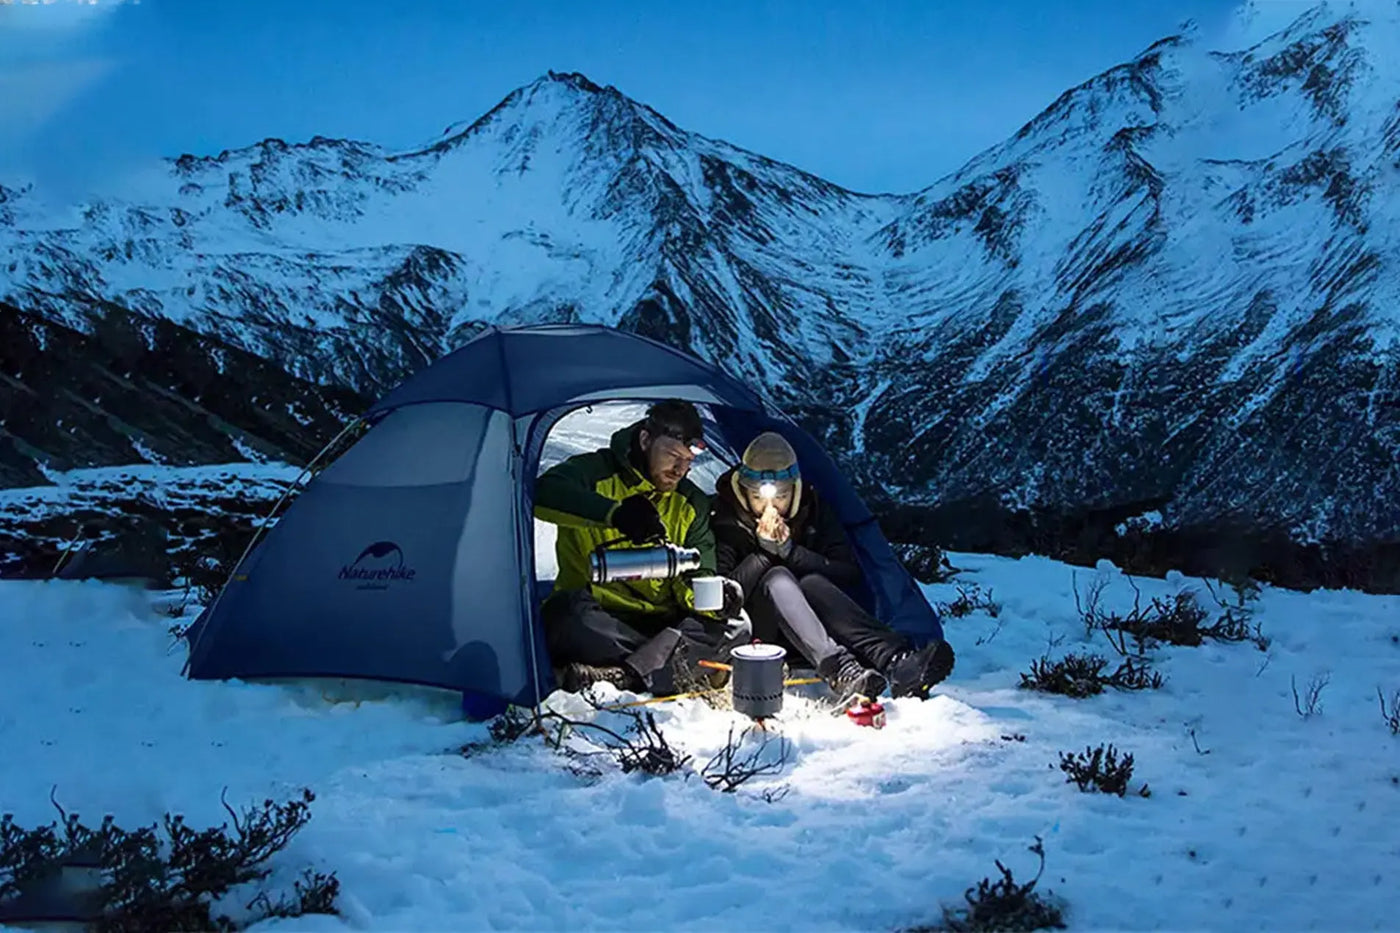 An image of a 4-Season-Tents by Naturehike official store